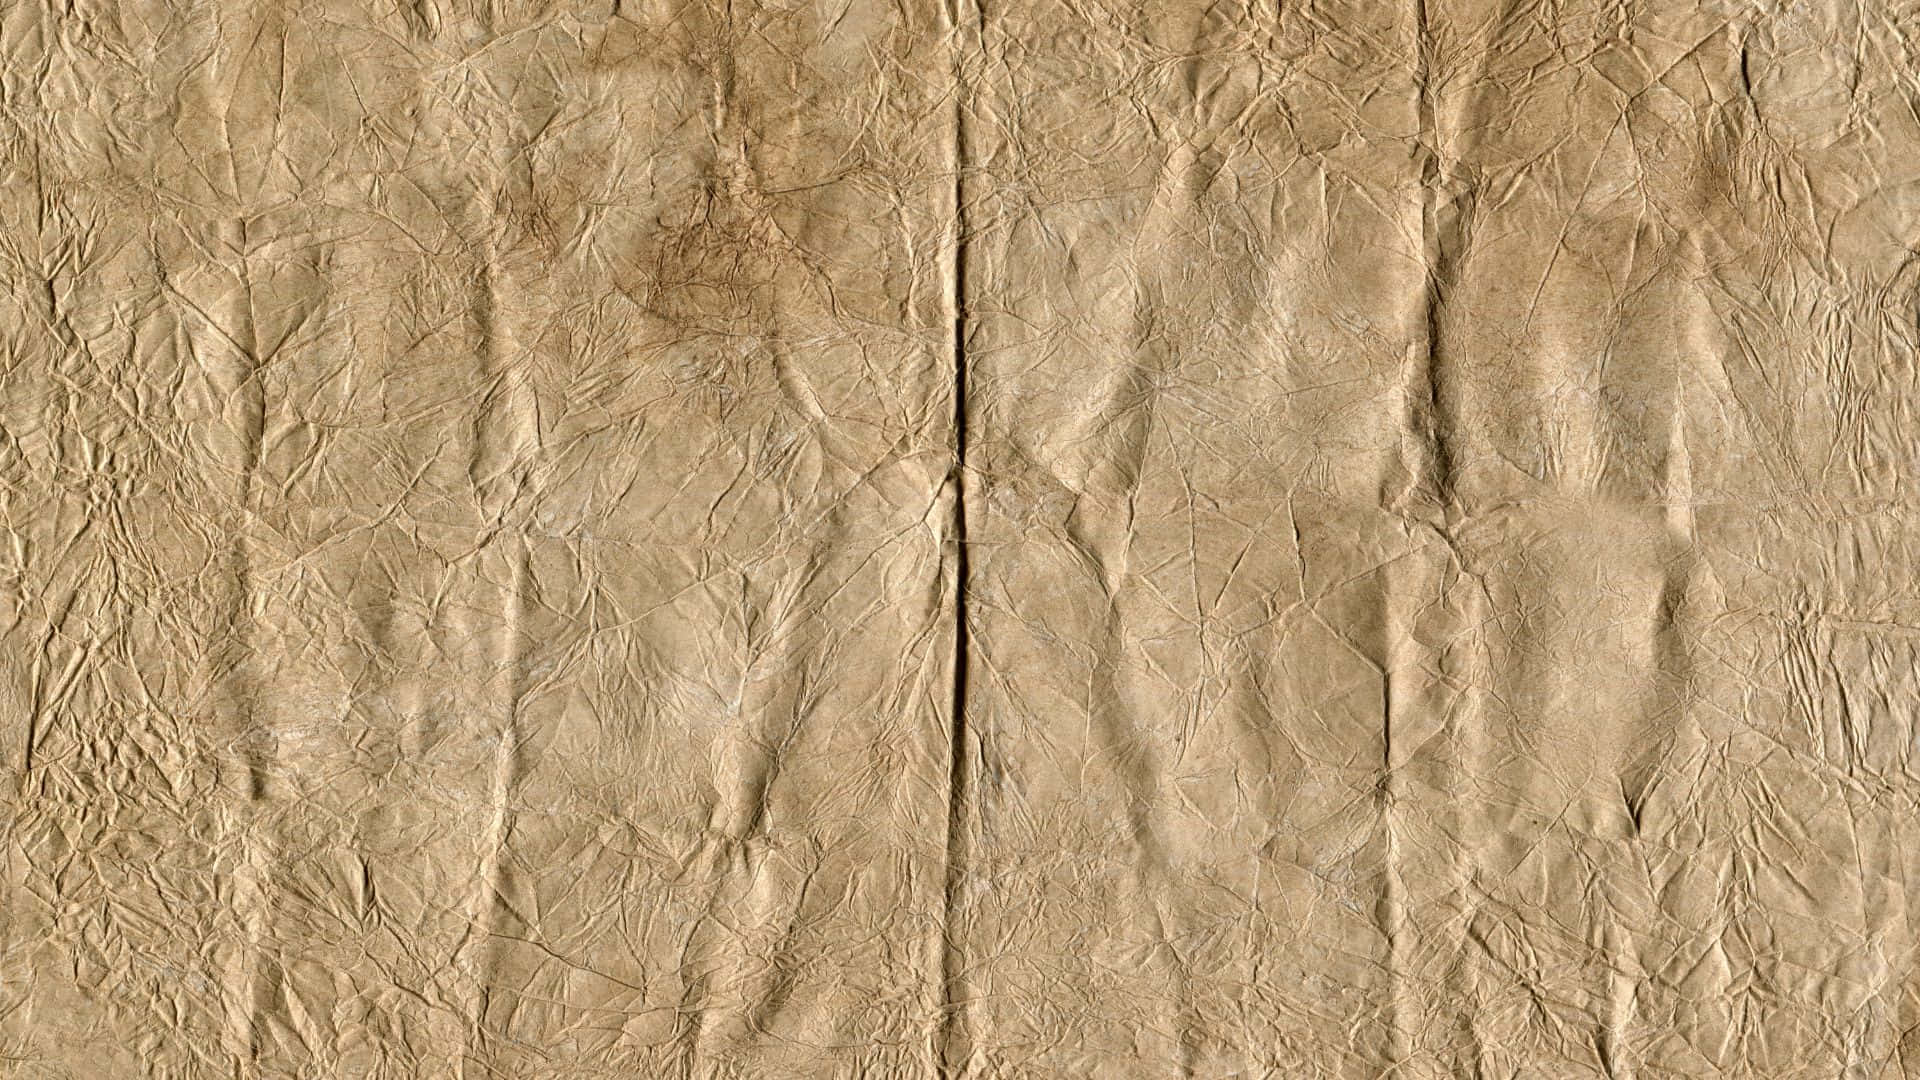 Weathered Paper Background